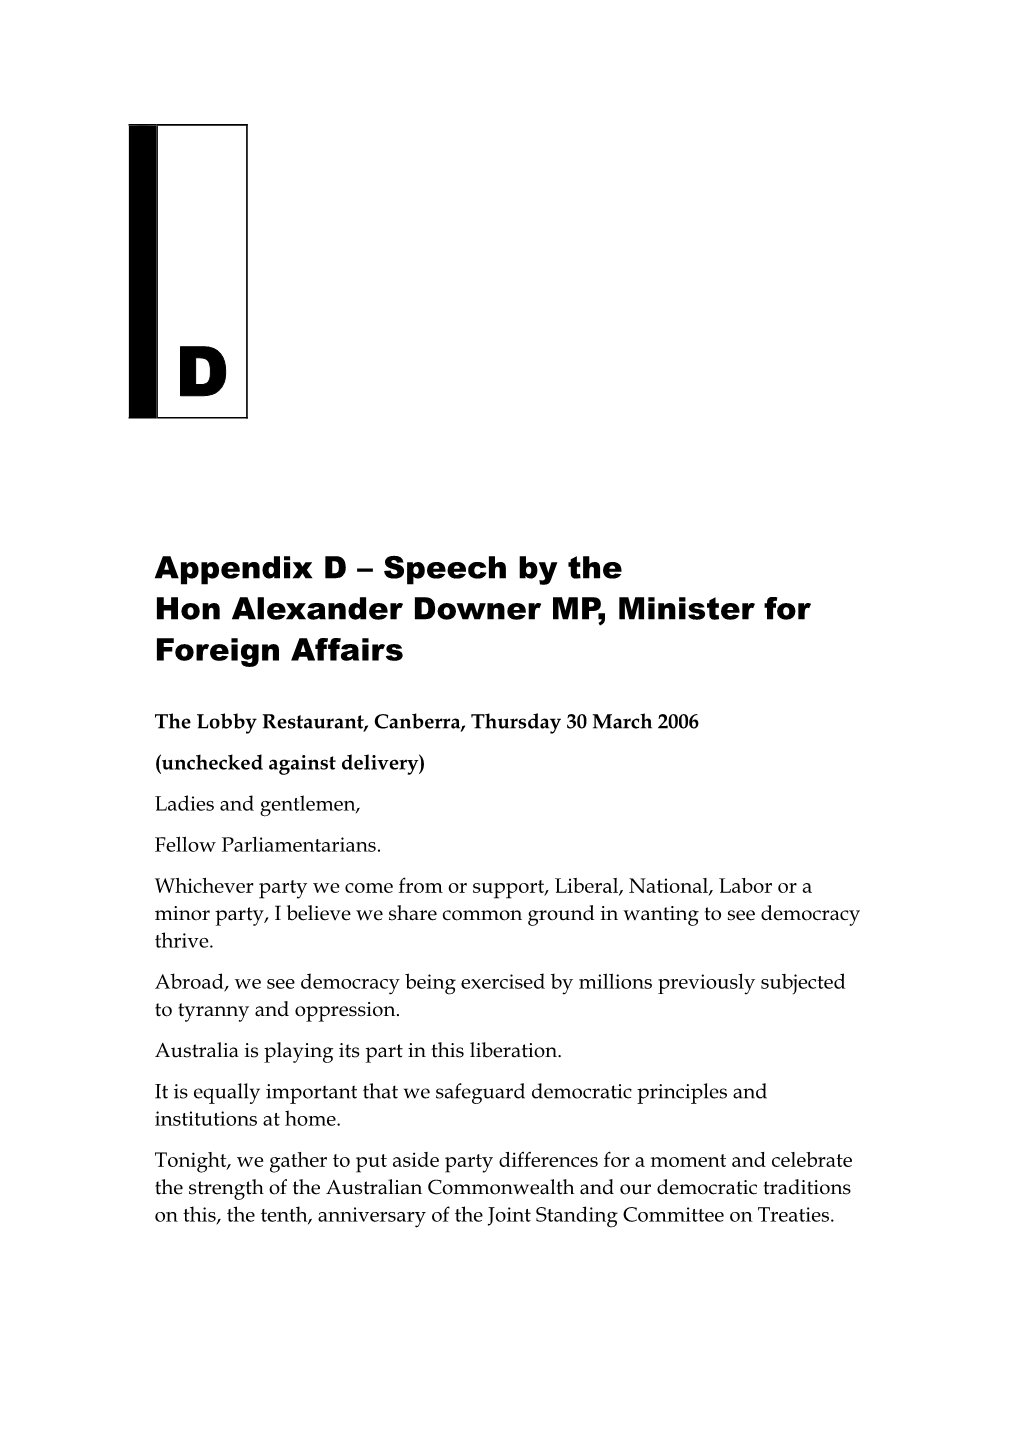 Appendix D – Speech by the Hon Alexander Downer MP, Minister for Foreign Affairs